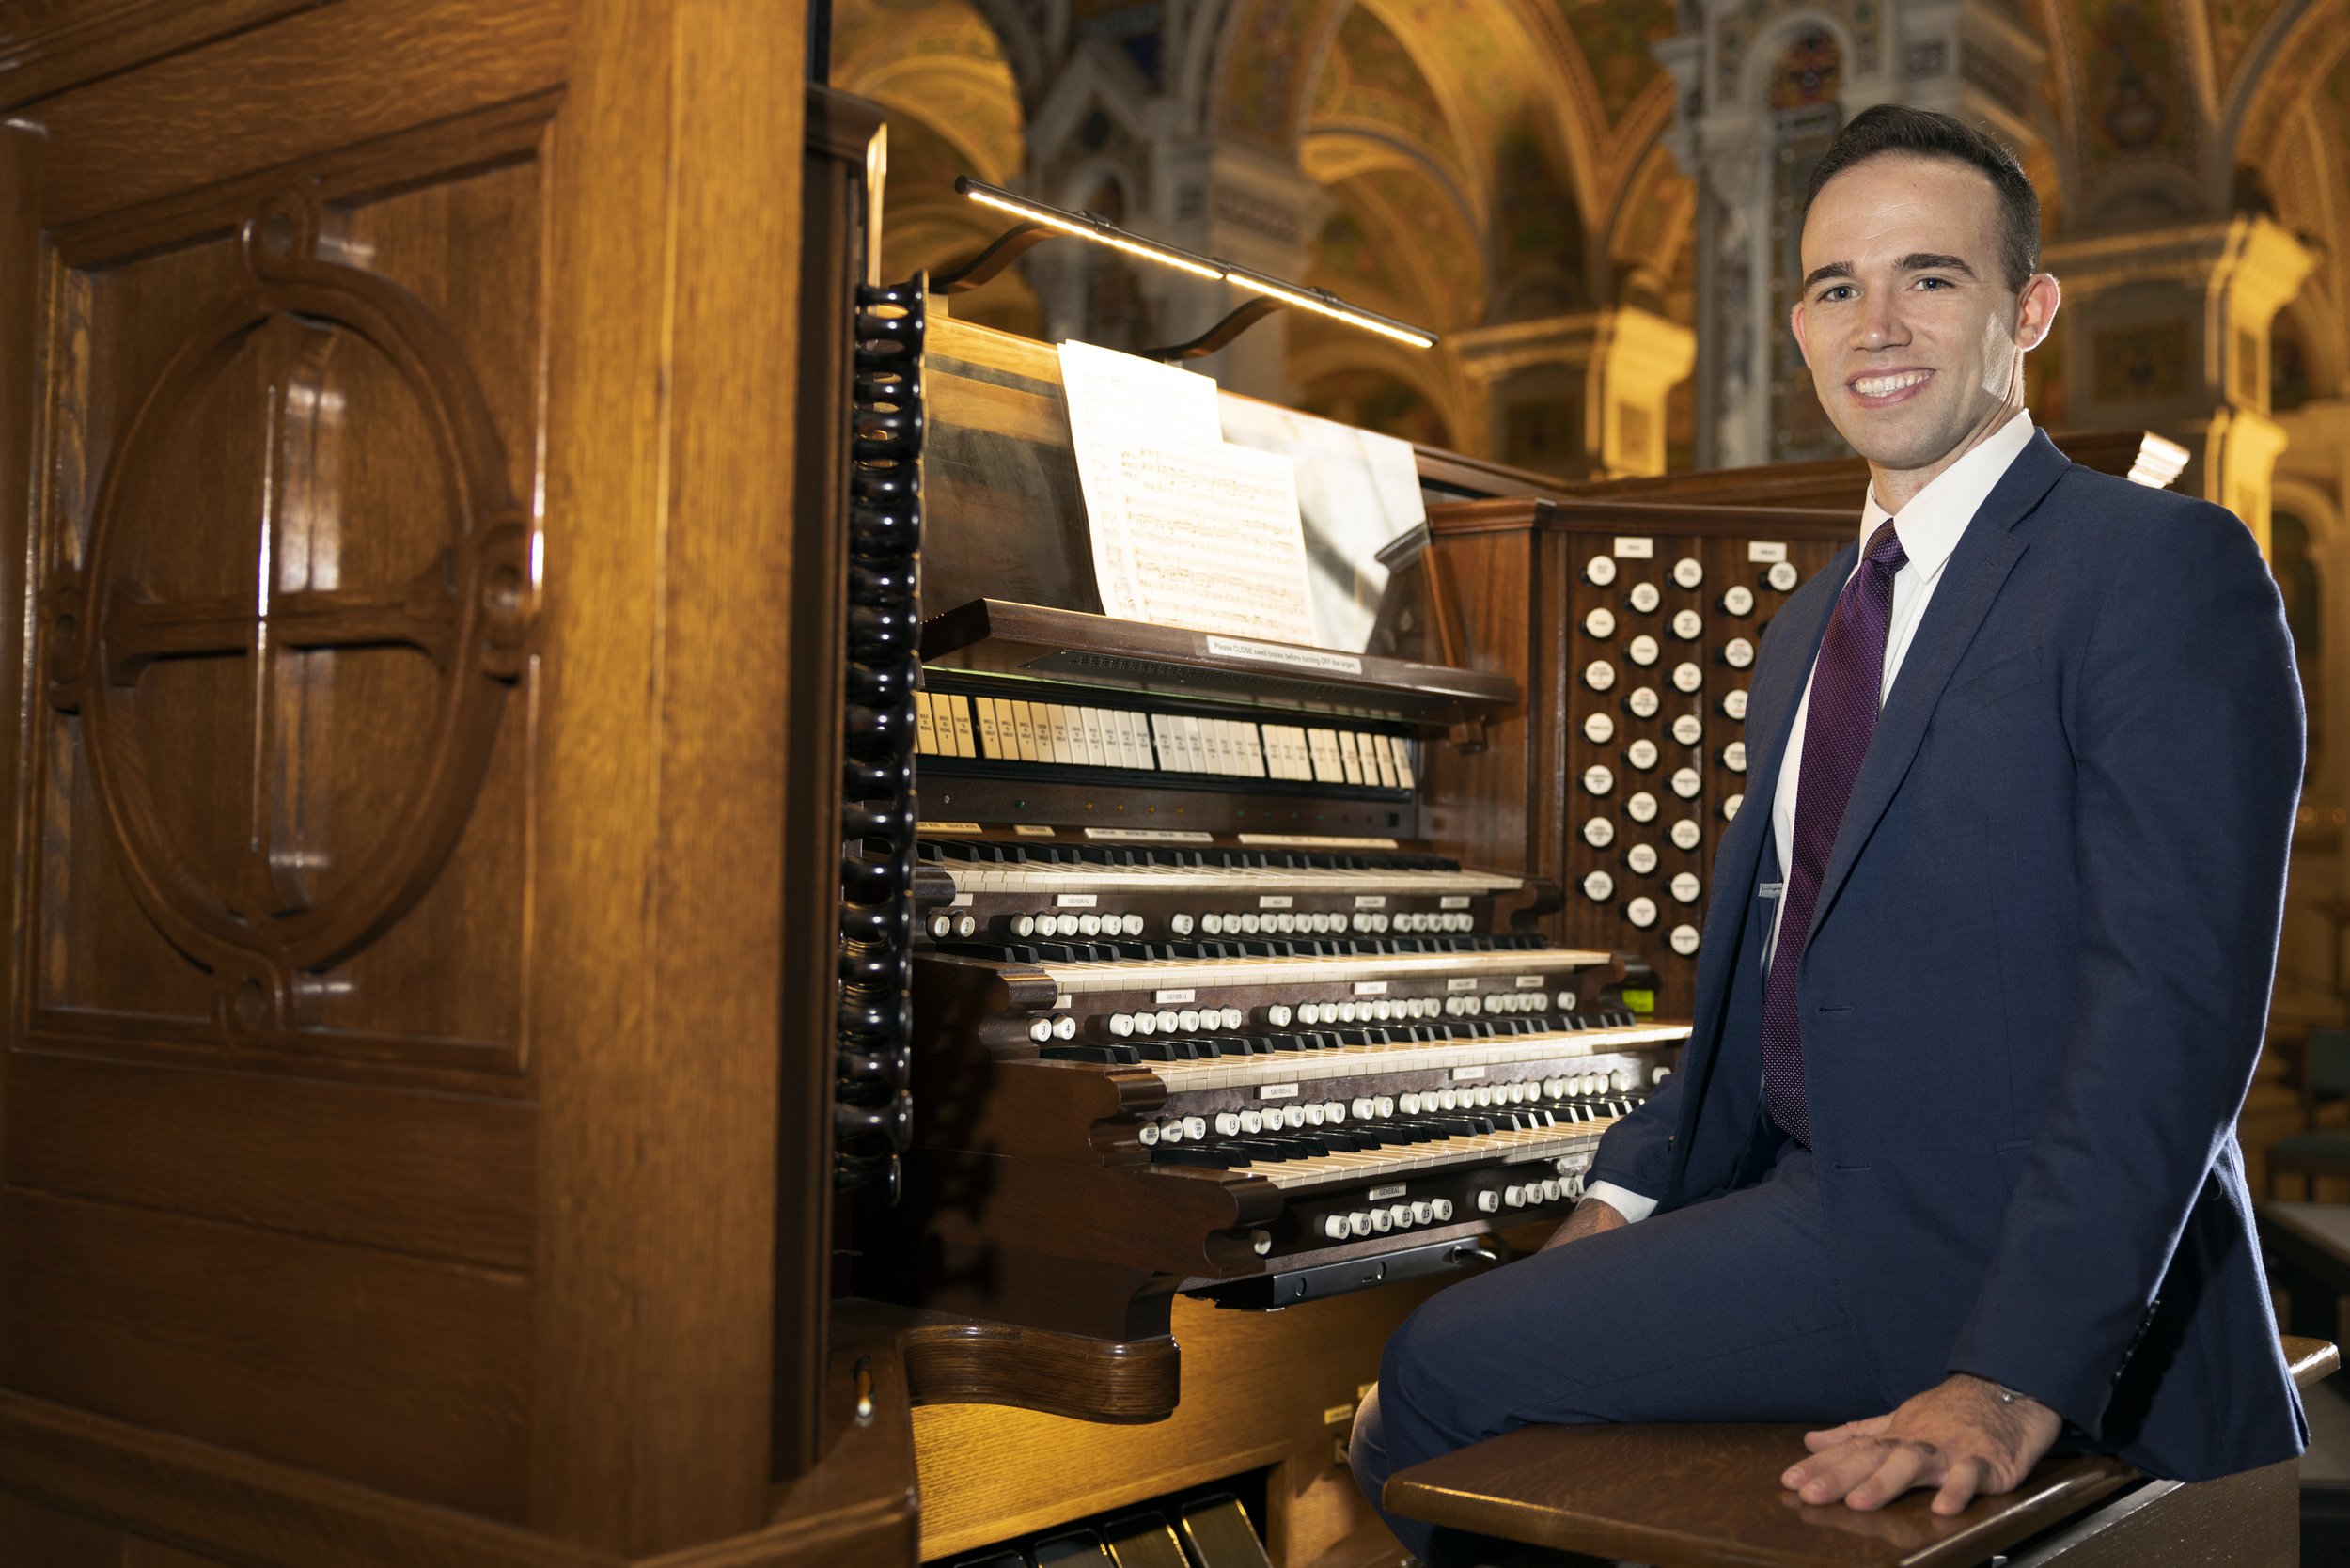  Andrew Kreigh, who recently started in the position of director of sacred music for the Archdiocese of St. Louis and the Cathedral Basilica of St. Louis, posed for a portrait July 19 at the Cathedral Basilica of St. Louis in St. Louis, Missouri. 